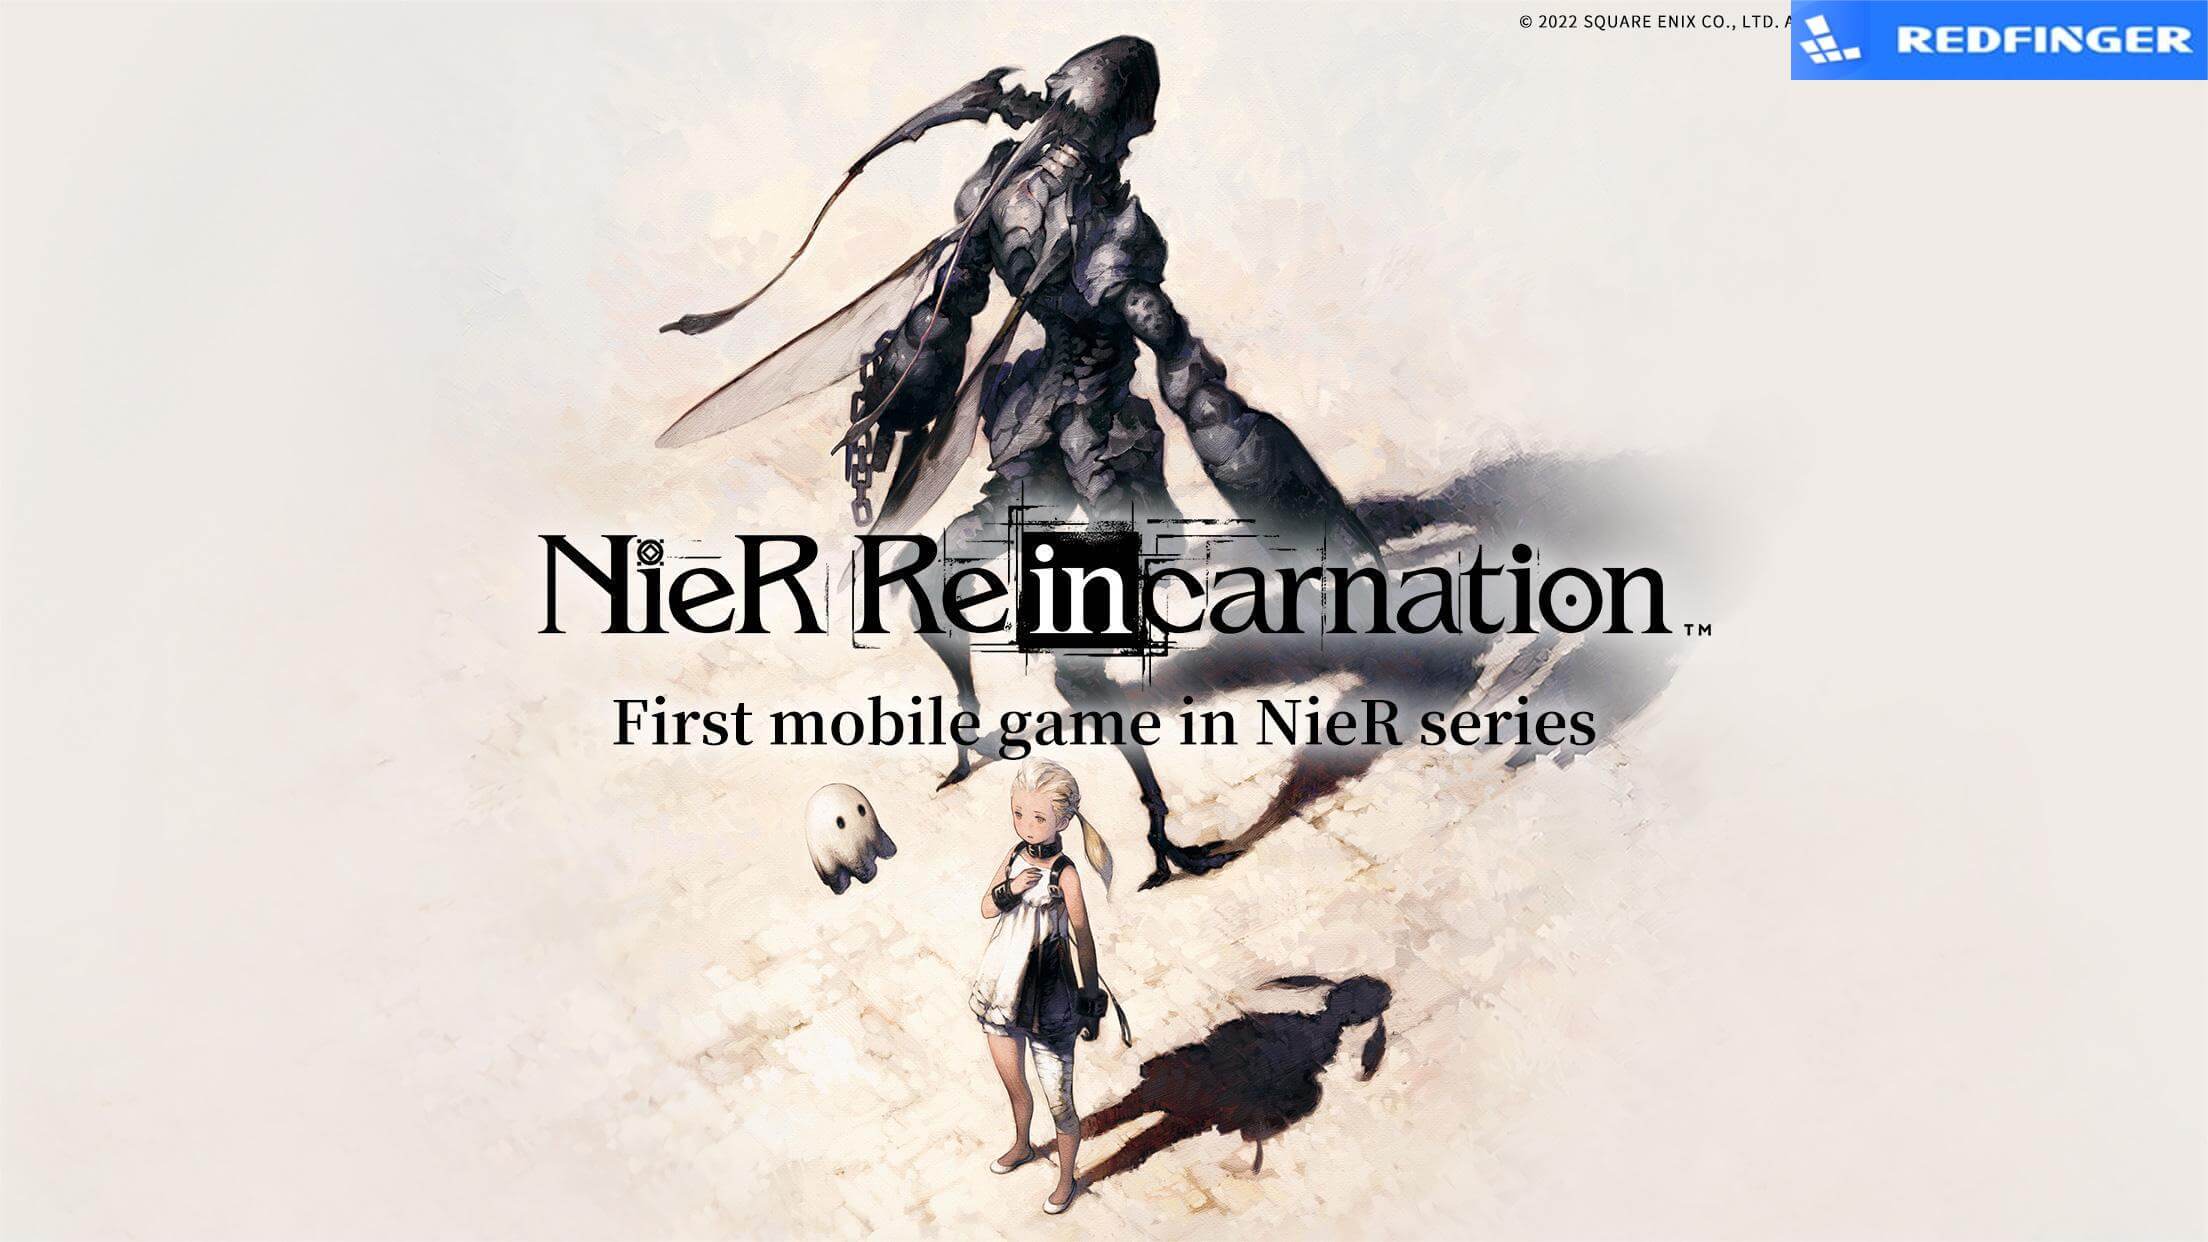 NieR Reincarnation, first mobile game in its series